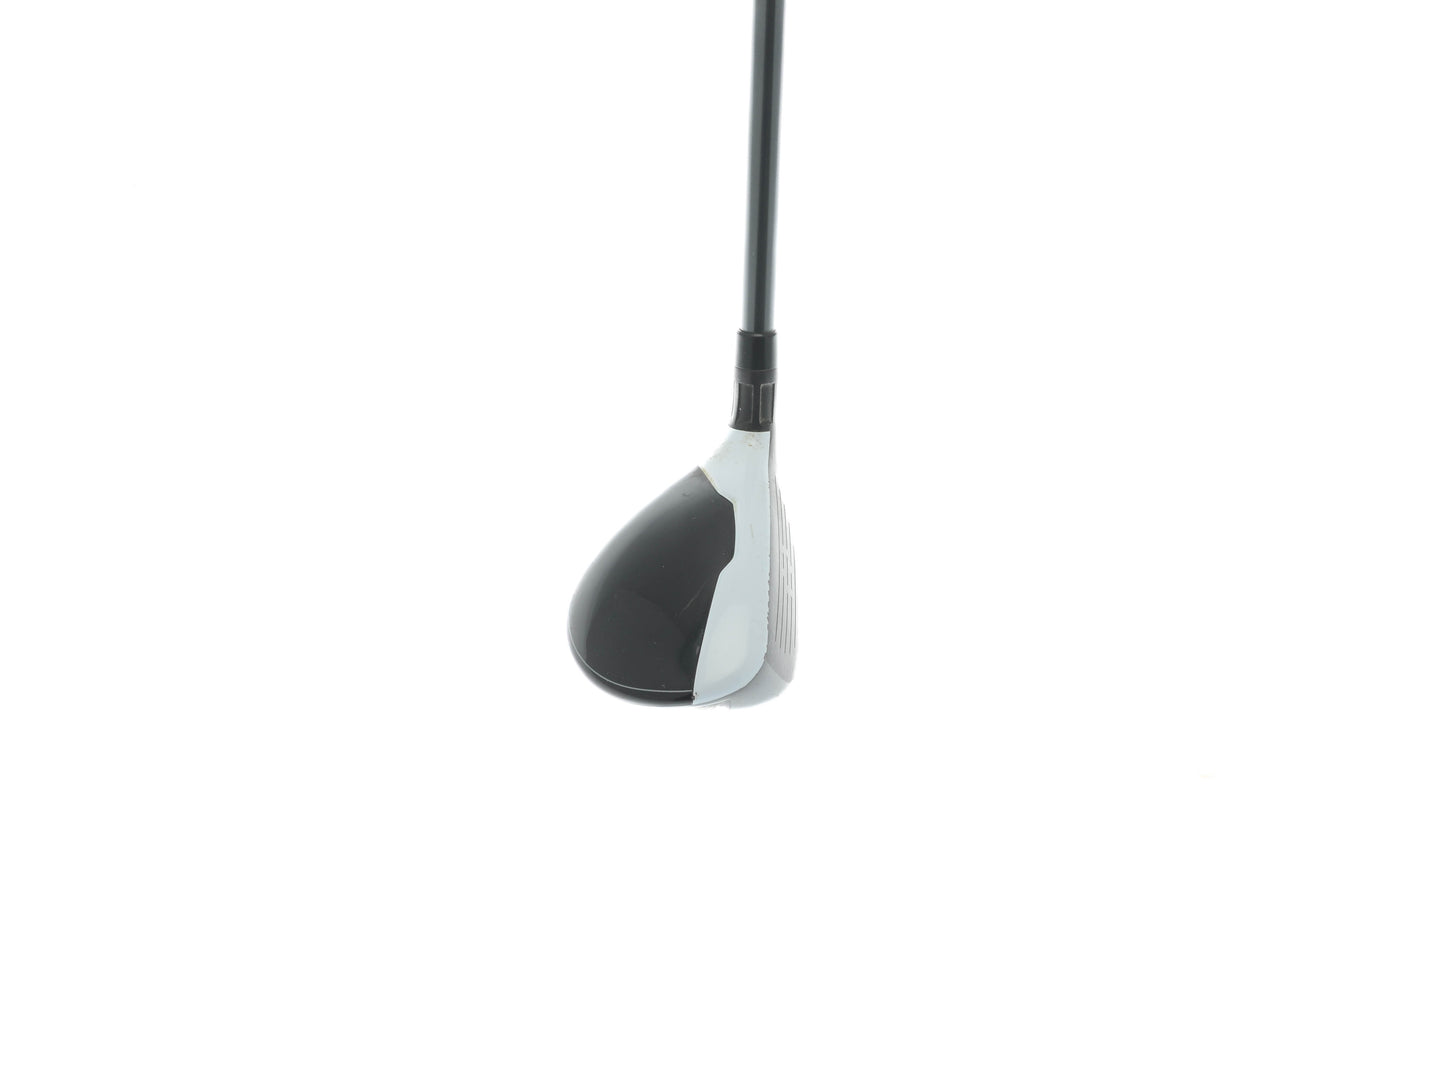 Taylormade M2 3/19